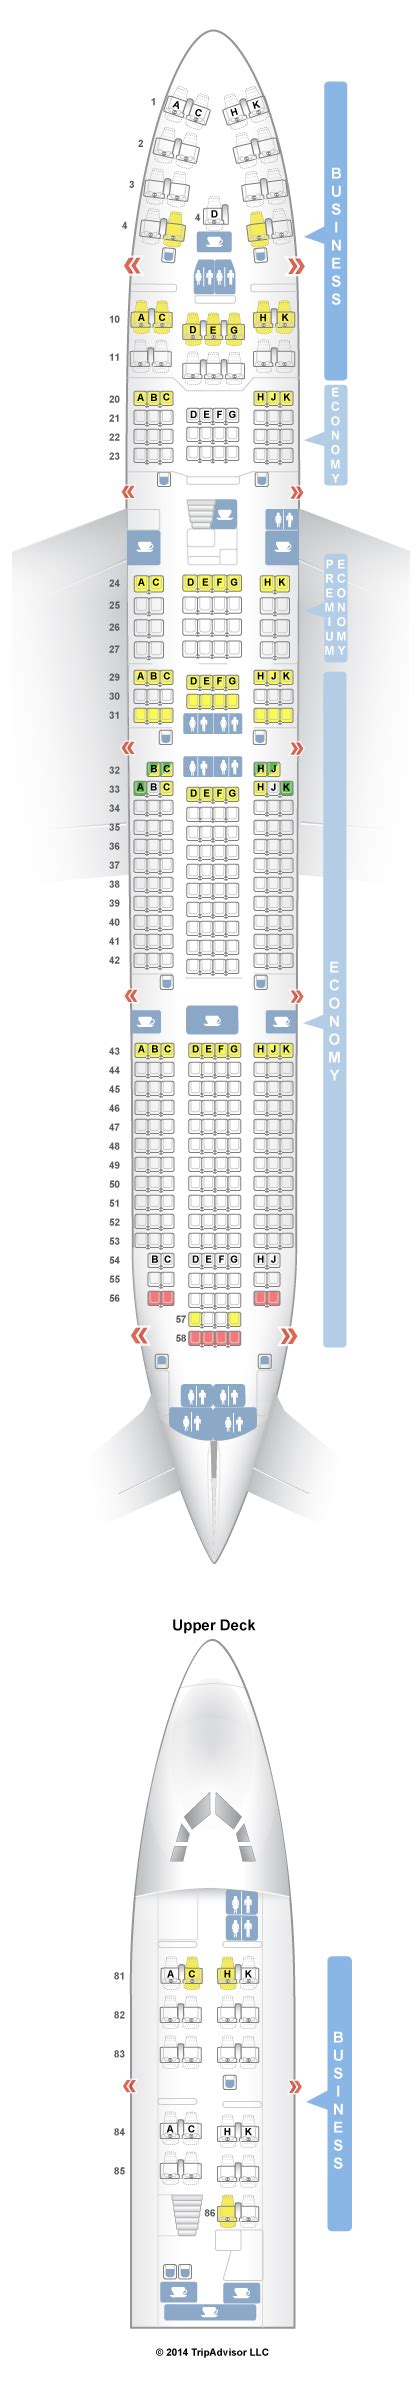 Lufthansa 747 400 seat map - The suites feature "extended personal space," as well as a monitor that's up to 27 inches. Like the first-class suite, the business-class suite will feature a personal wardrobe. These suites will feature a door. Regular business-class seats feature walls that will be at least 45 inches high and convert into a bed that's about 6.5 feet long.